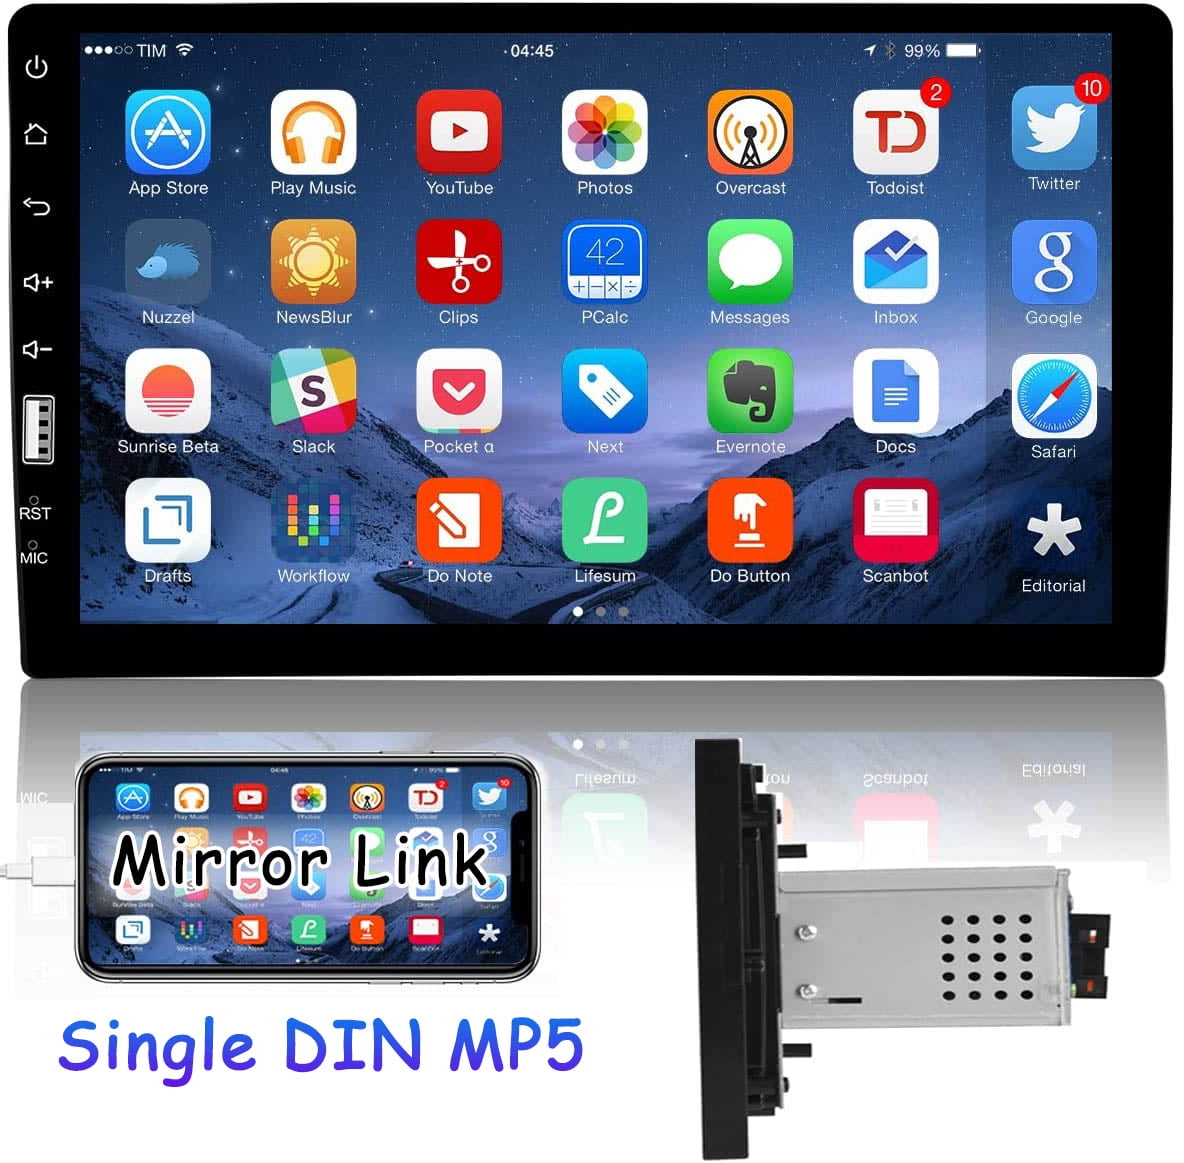 1 Din Android MP5 Car Stereo With GPS, IPS Navigation, WiFi, Bluetooth, And  Mirror Link From Xselectronics, $74.84